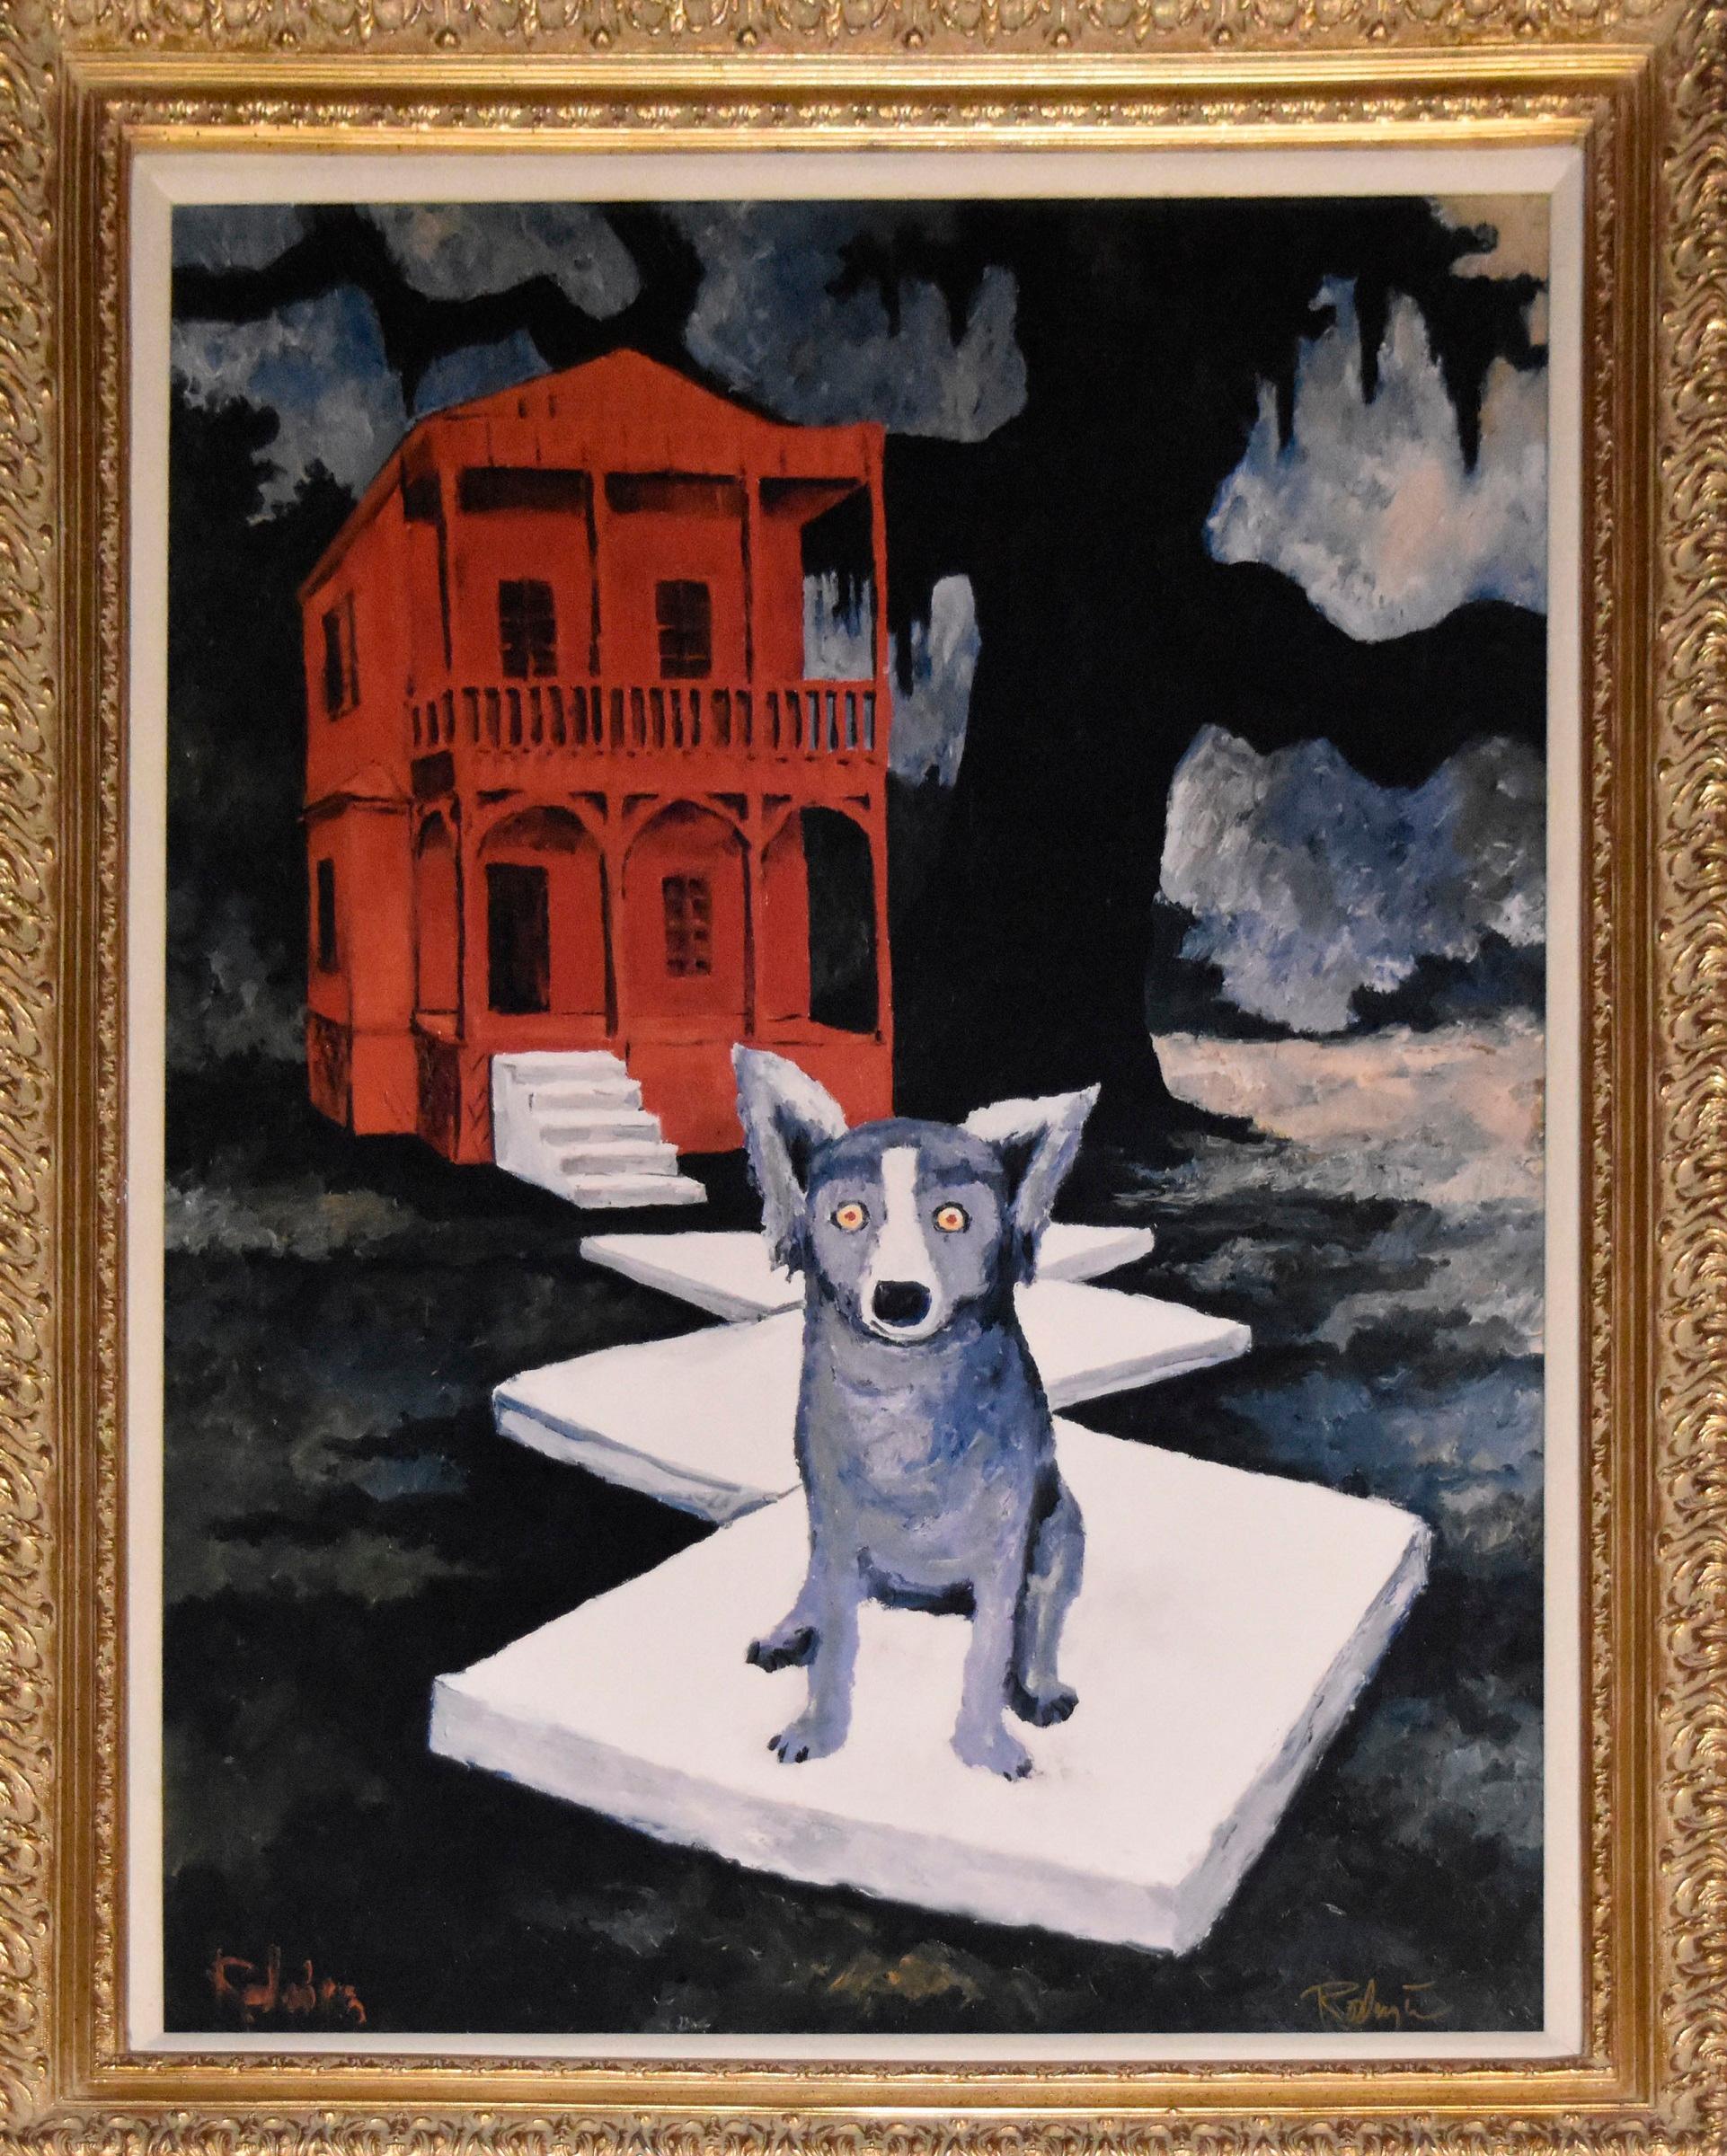 George Rodrigue Animal Print - It's Tiffany - Giclee on Canvas Board - Signed -  Blue Dog